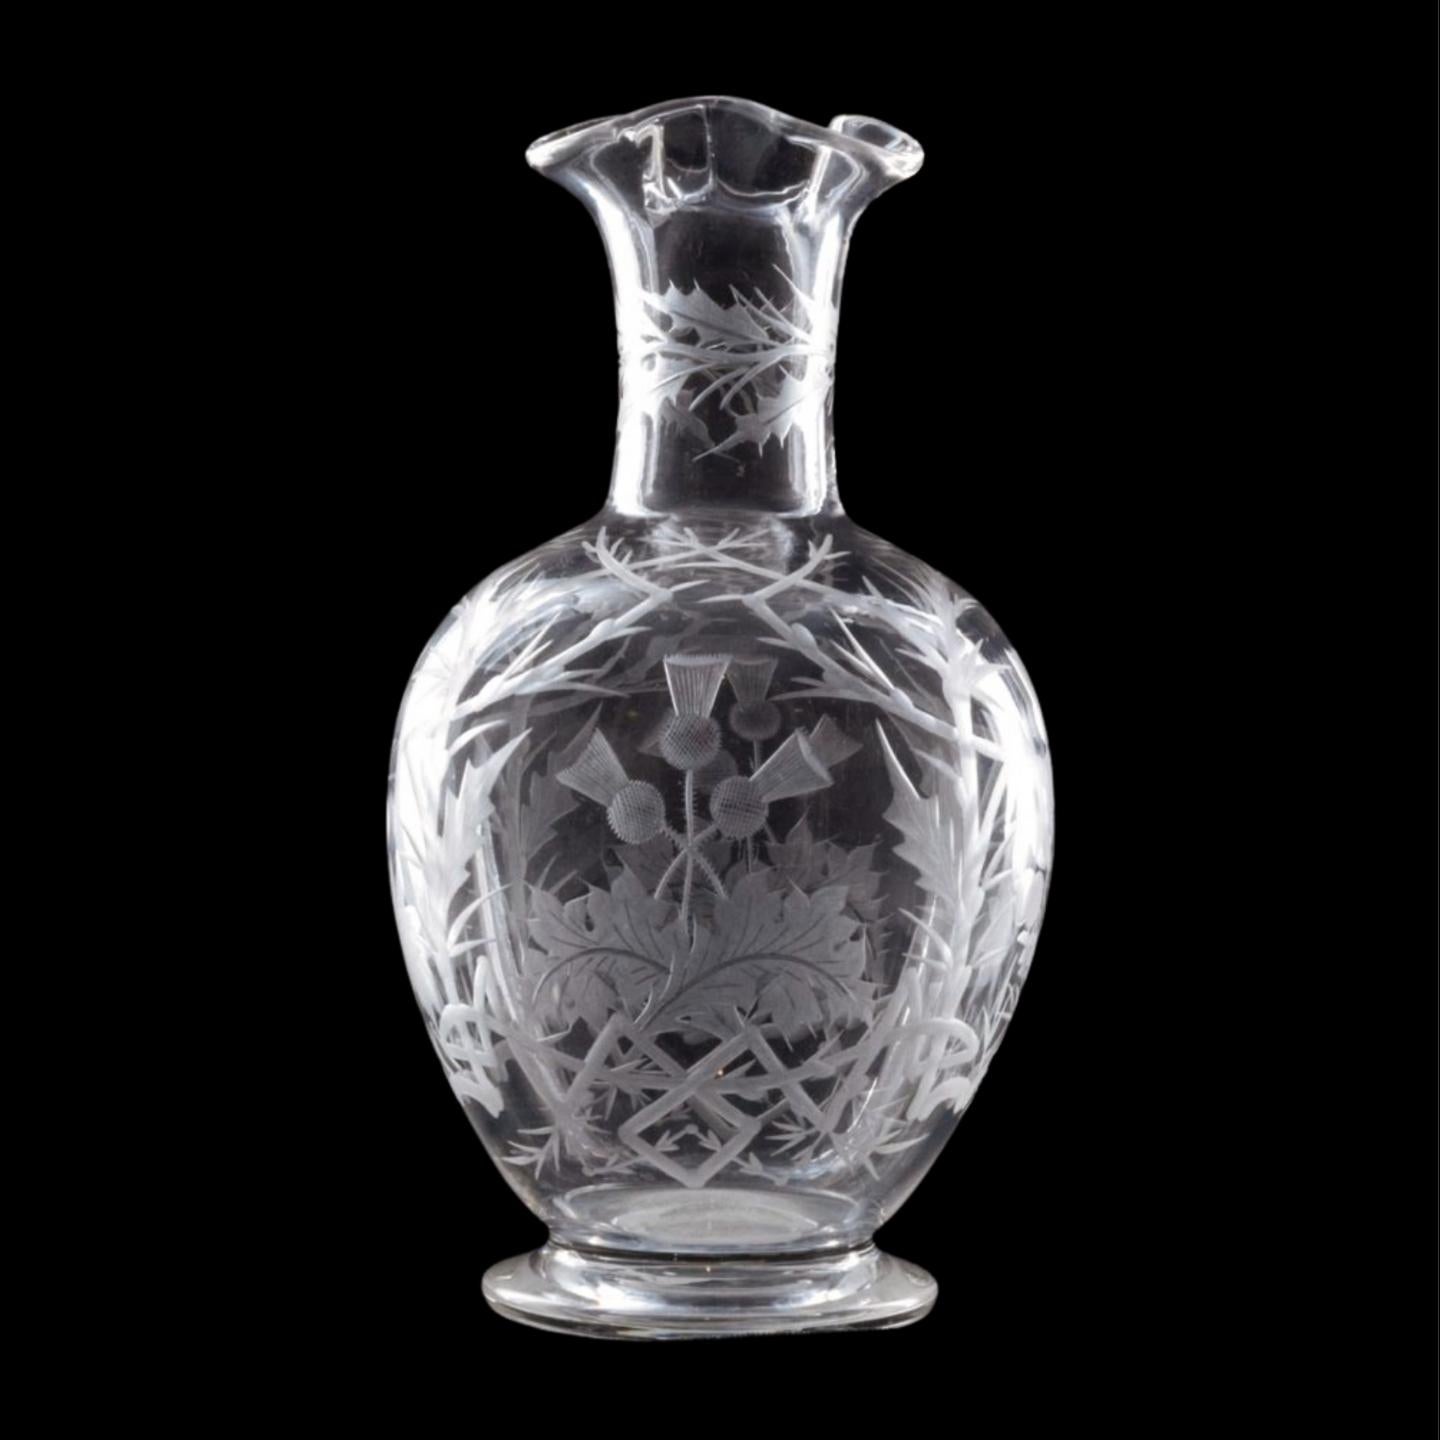 A carafe of pleasing shape & proportions, with elaborate wheel-cut decoration of thistles and thorns. Possibly intended for whisky - or at least the water to be added to it; but it could also be of Scottish Nationalist symbolism.

Stourbridge glass